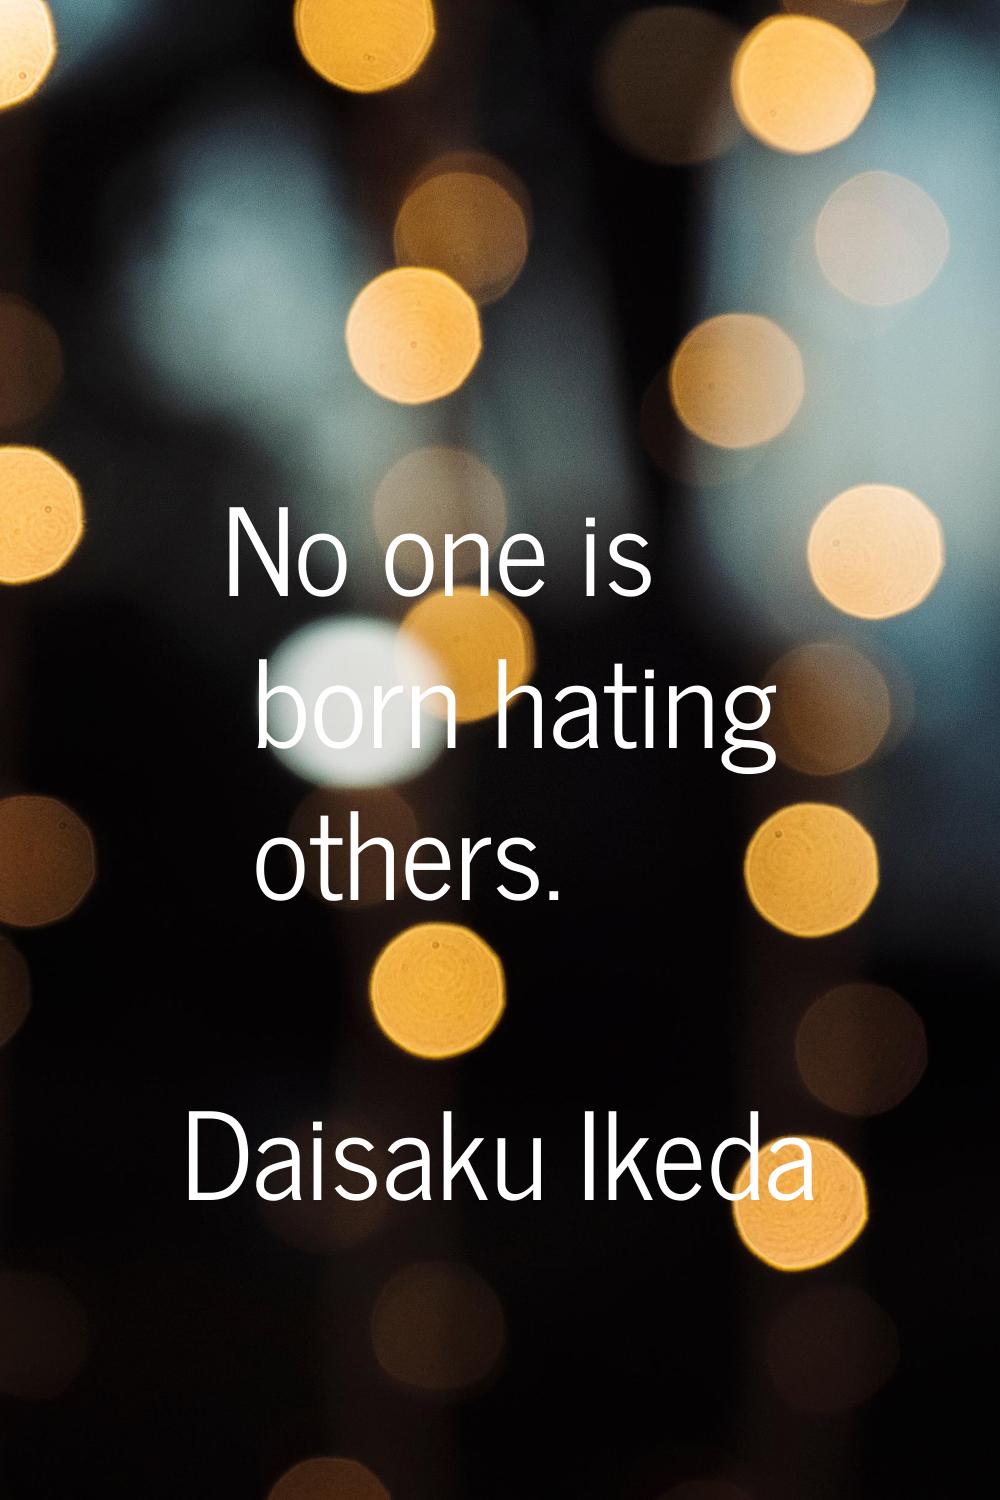 No one is born hating others.